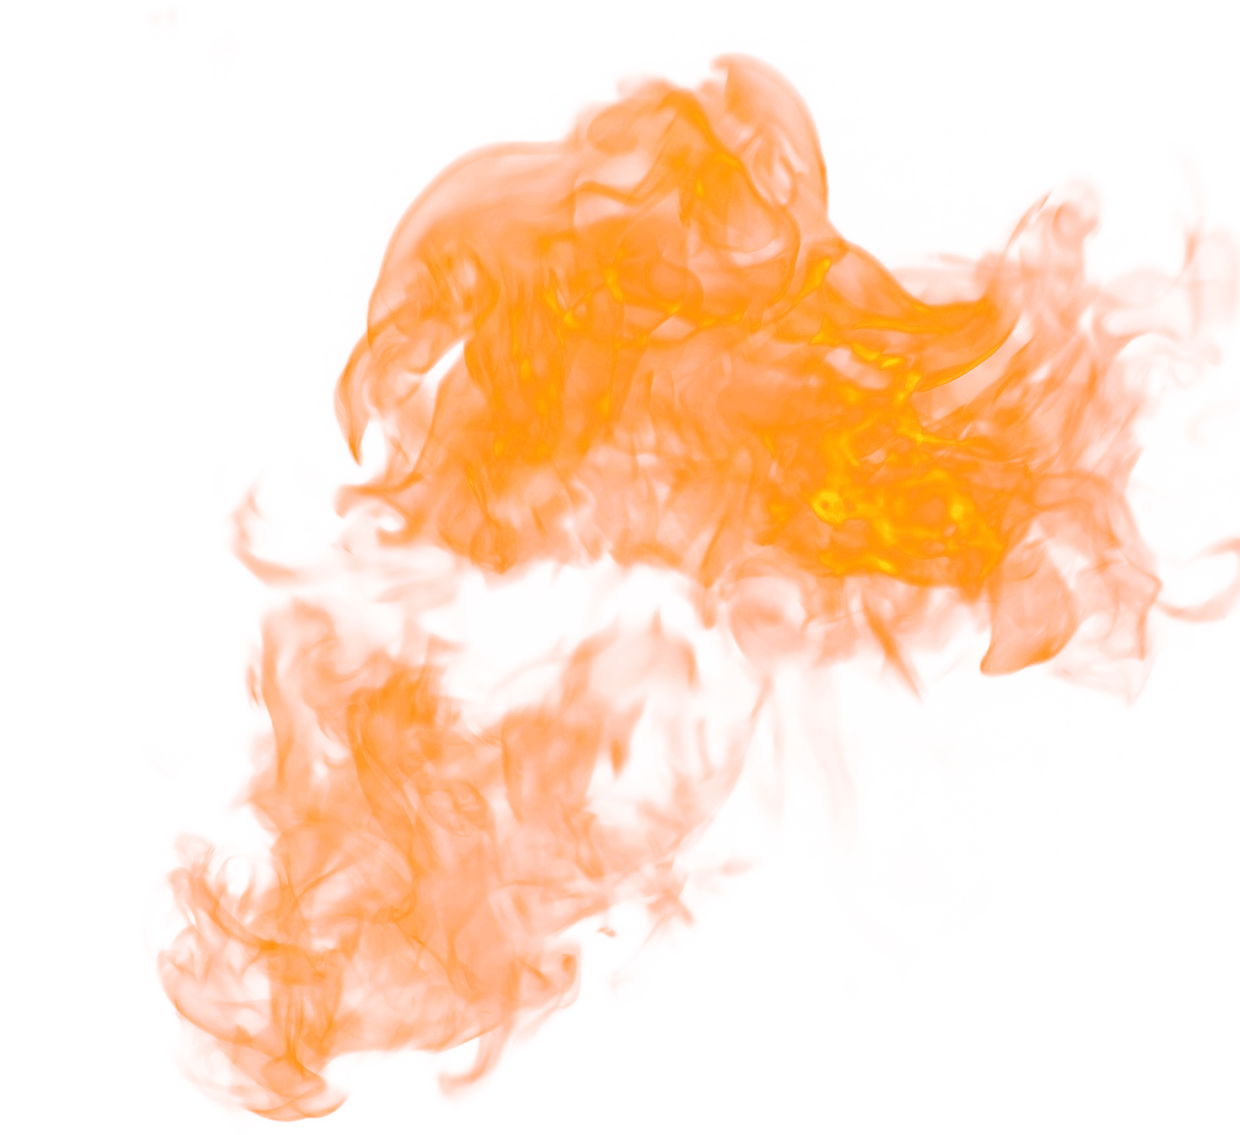 Fire Flame PNG Image. Free transparent CC0 PNG Image Library